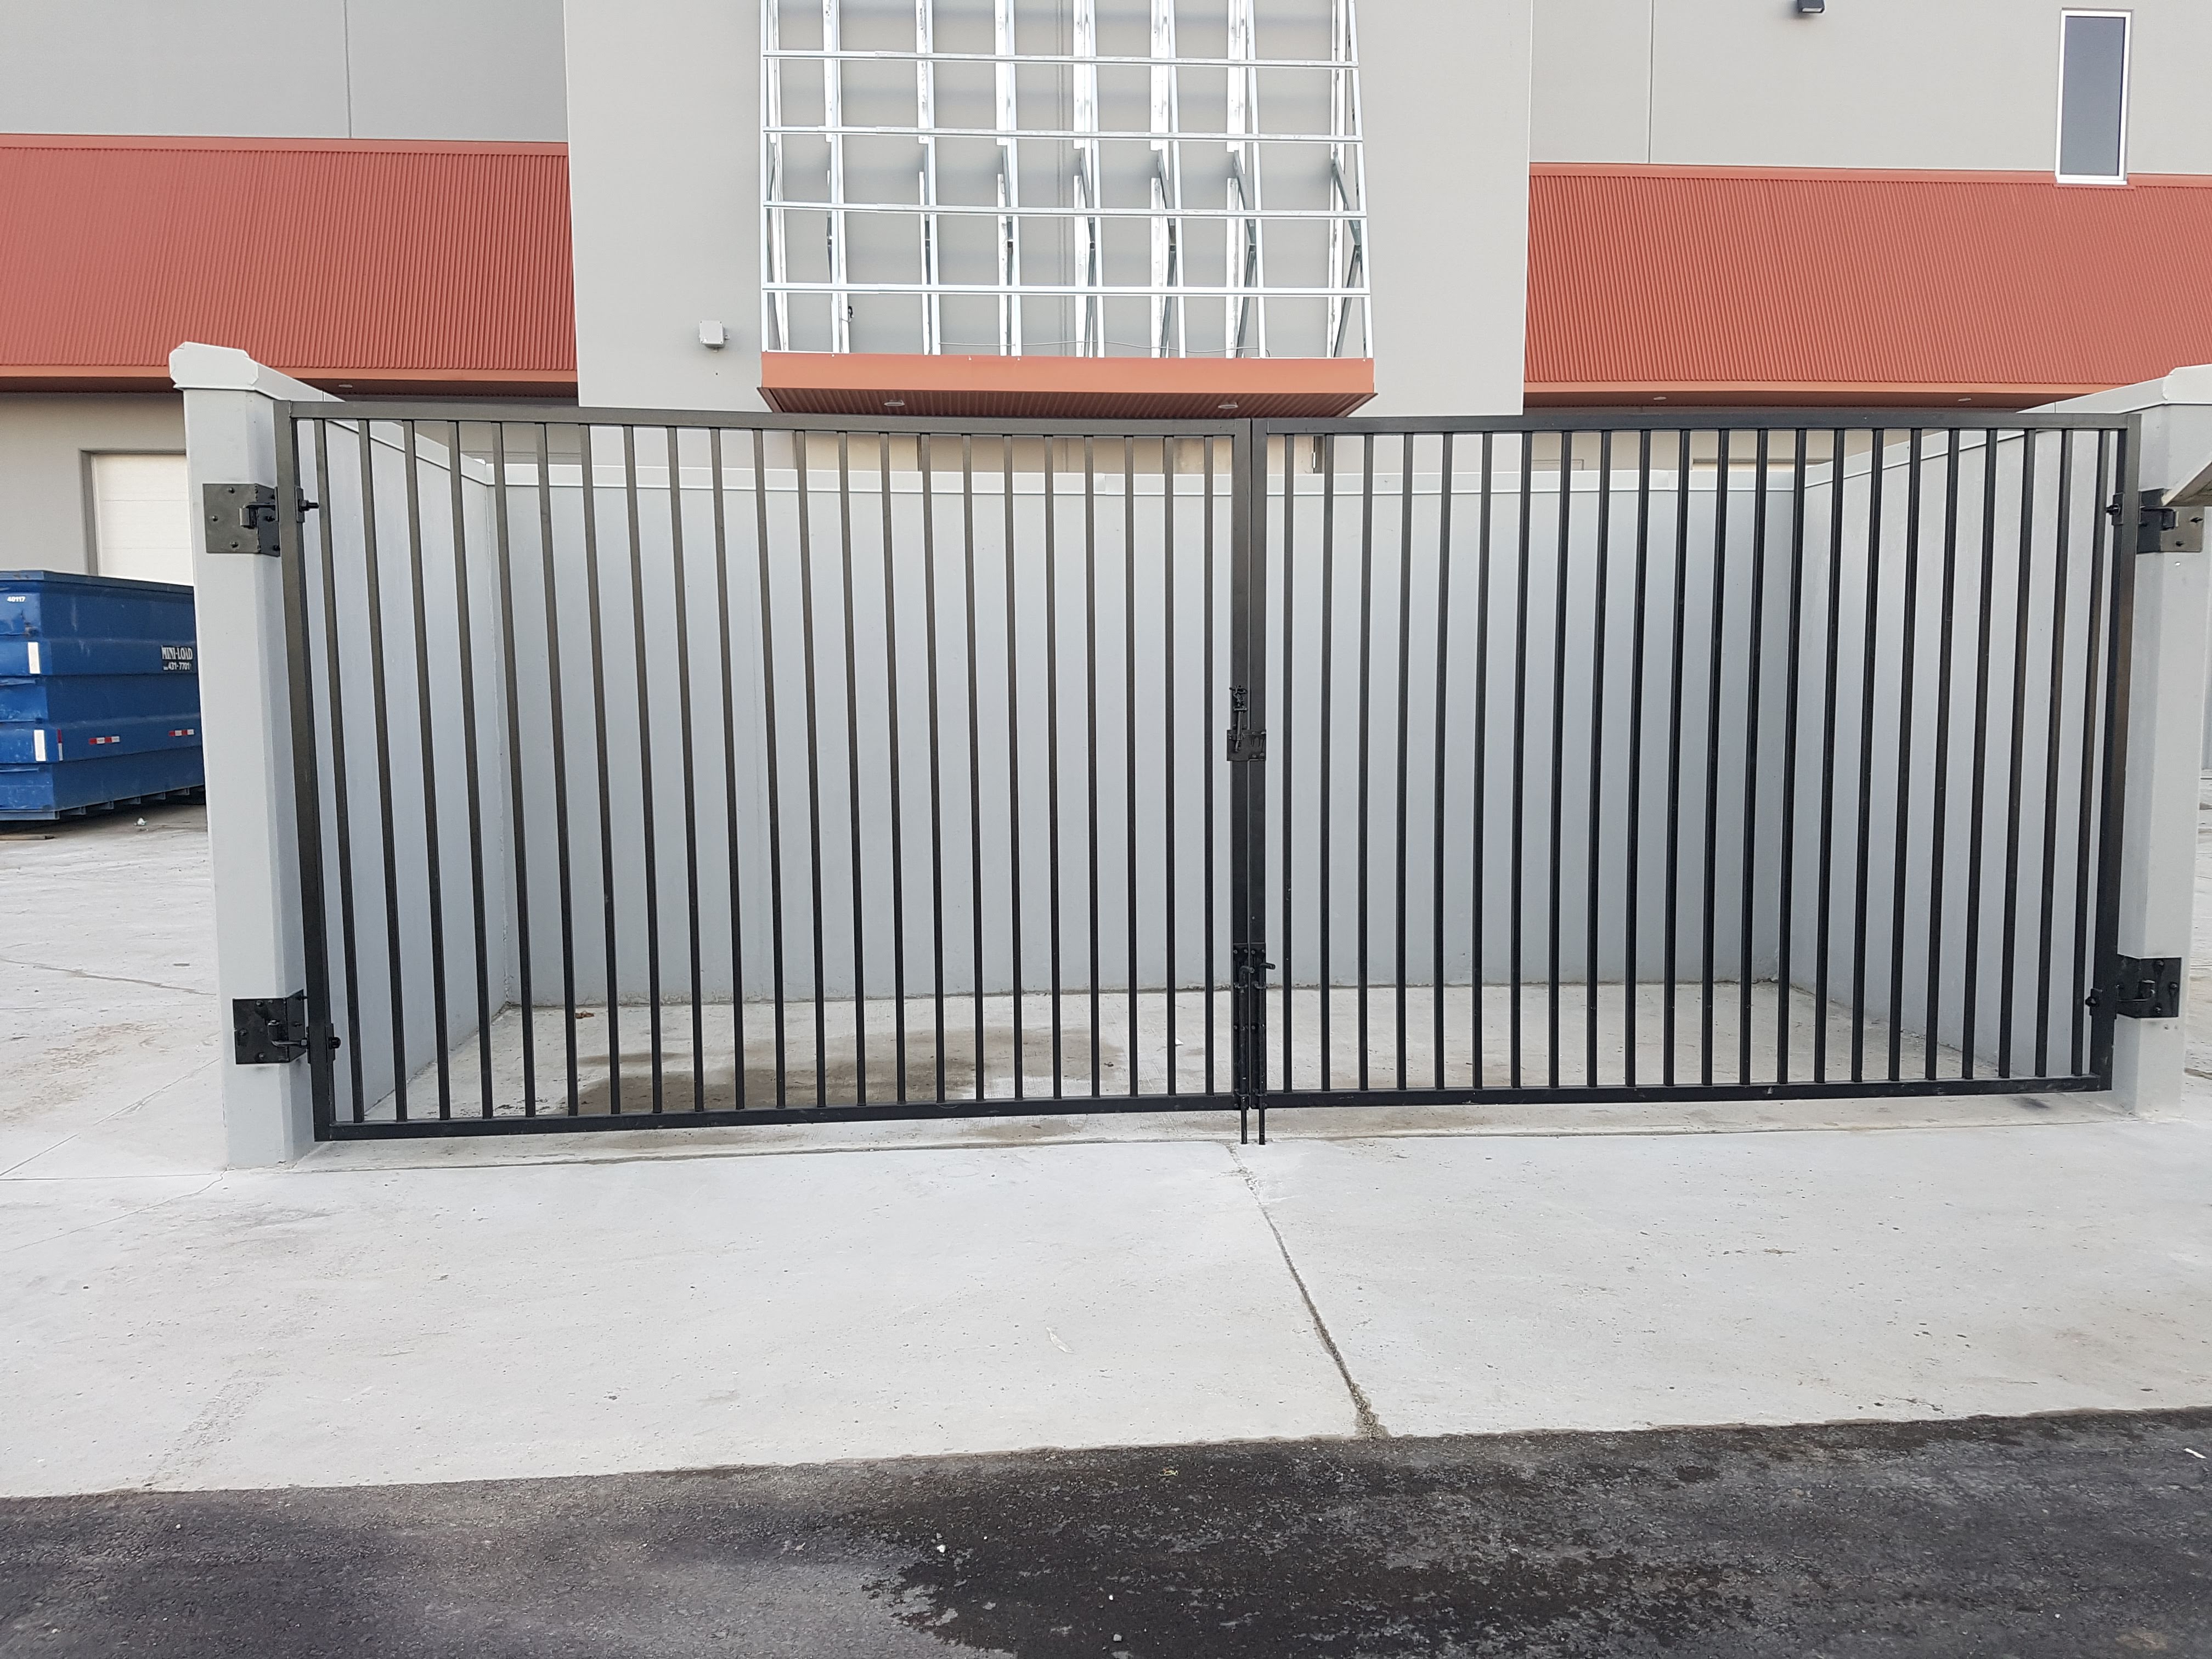 Iron/Steel picket gates for dumpster enclosure